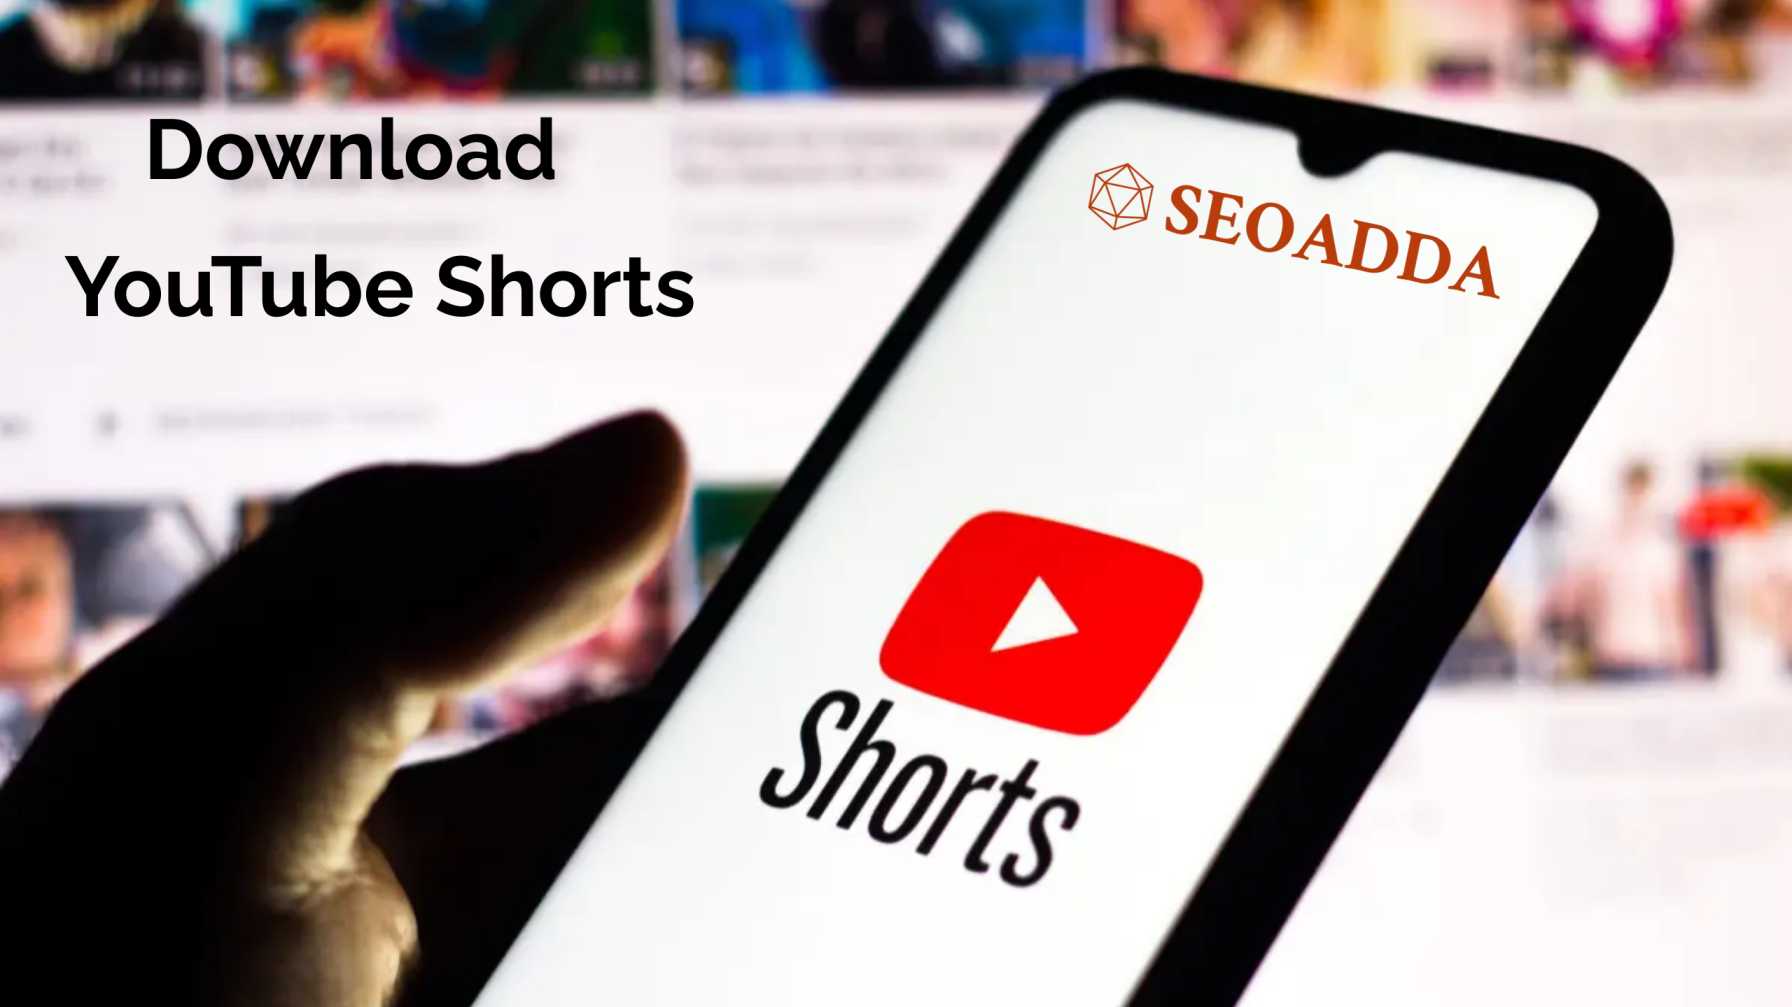 youtube shorts download